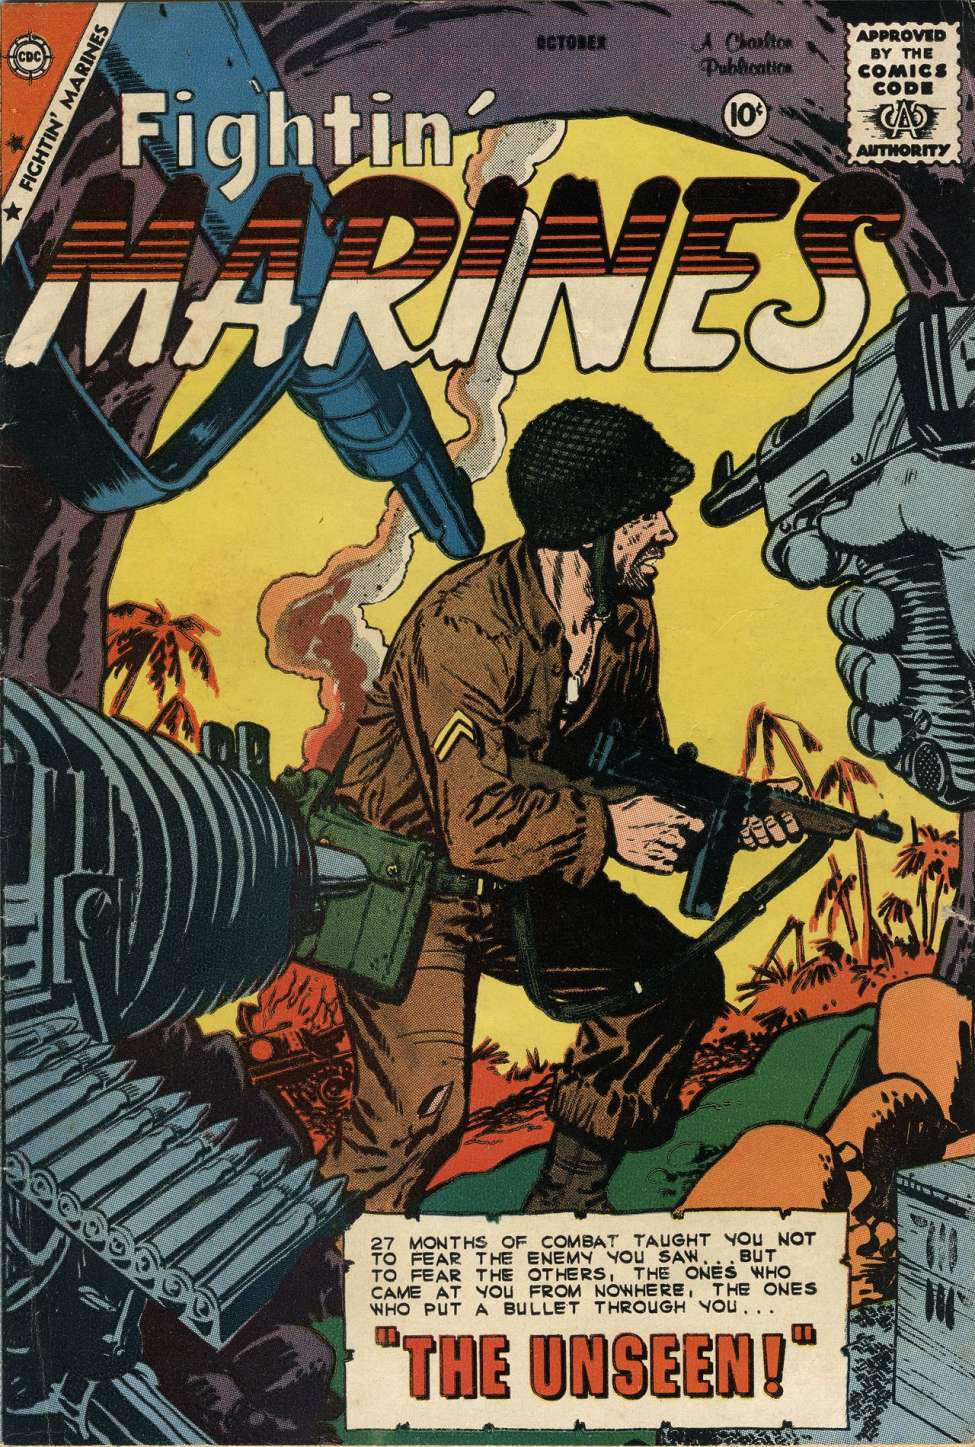 Book Cover For Fightin' Marines 32 - Version 2